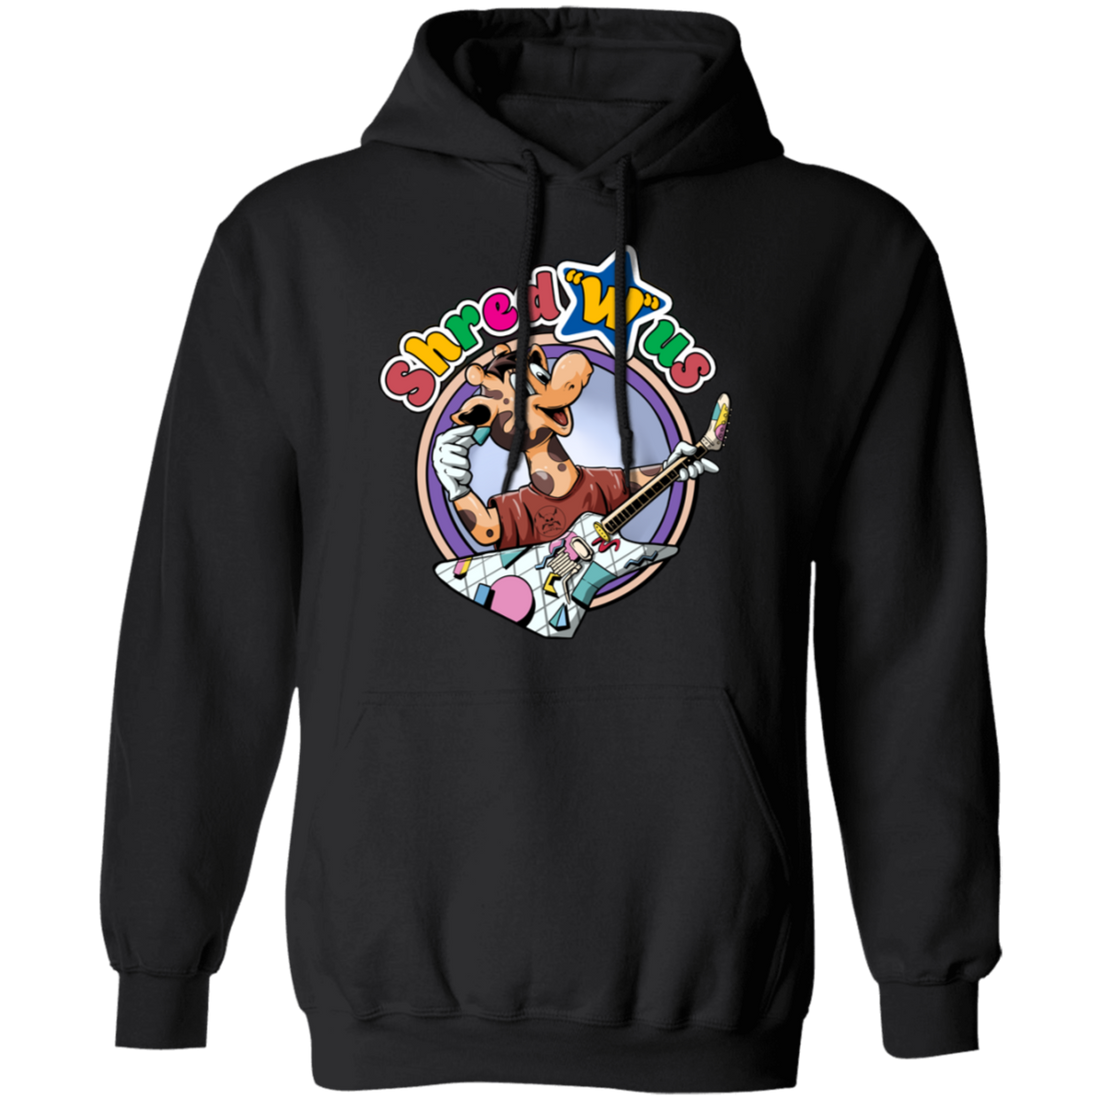 Shred With Us Pullover Hoodie